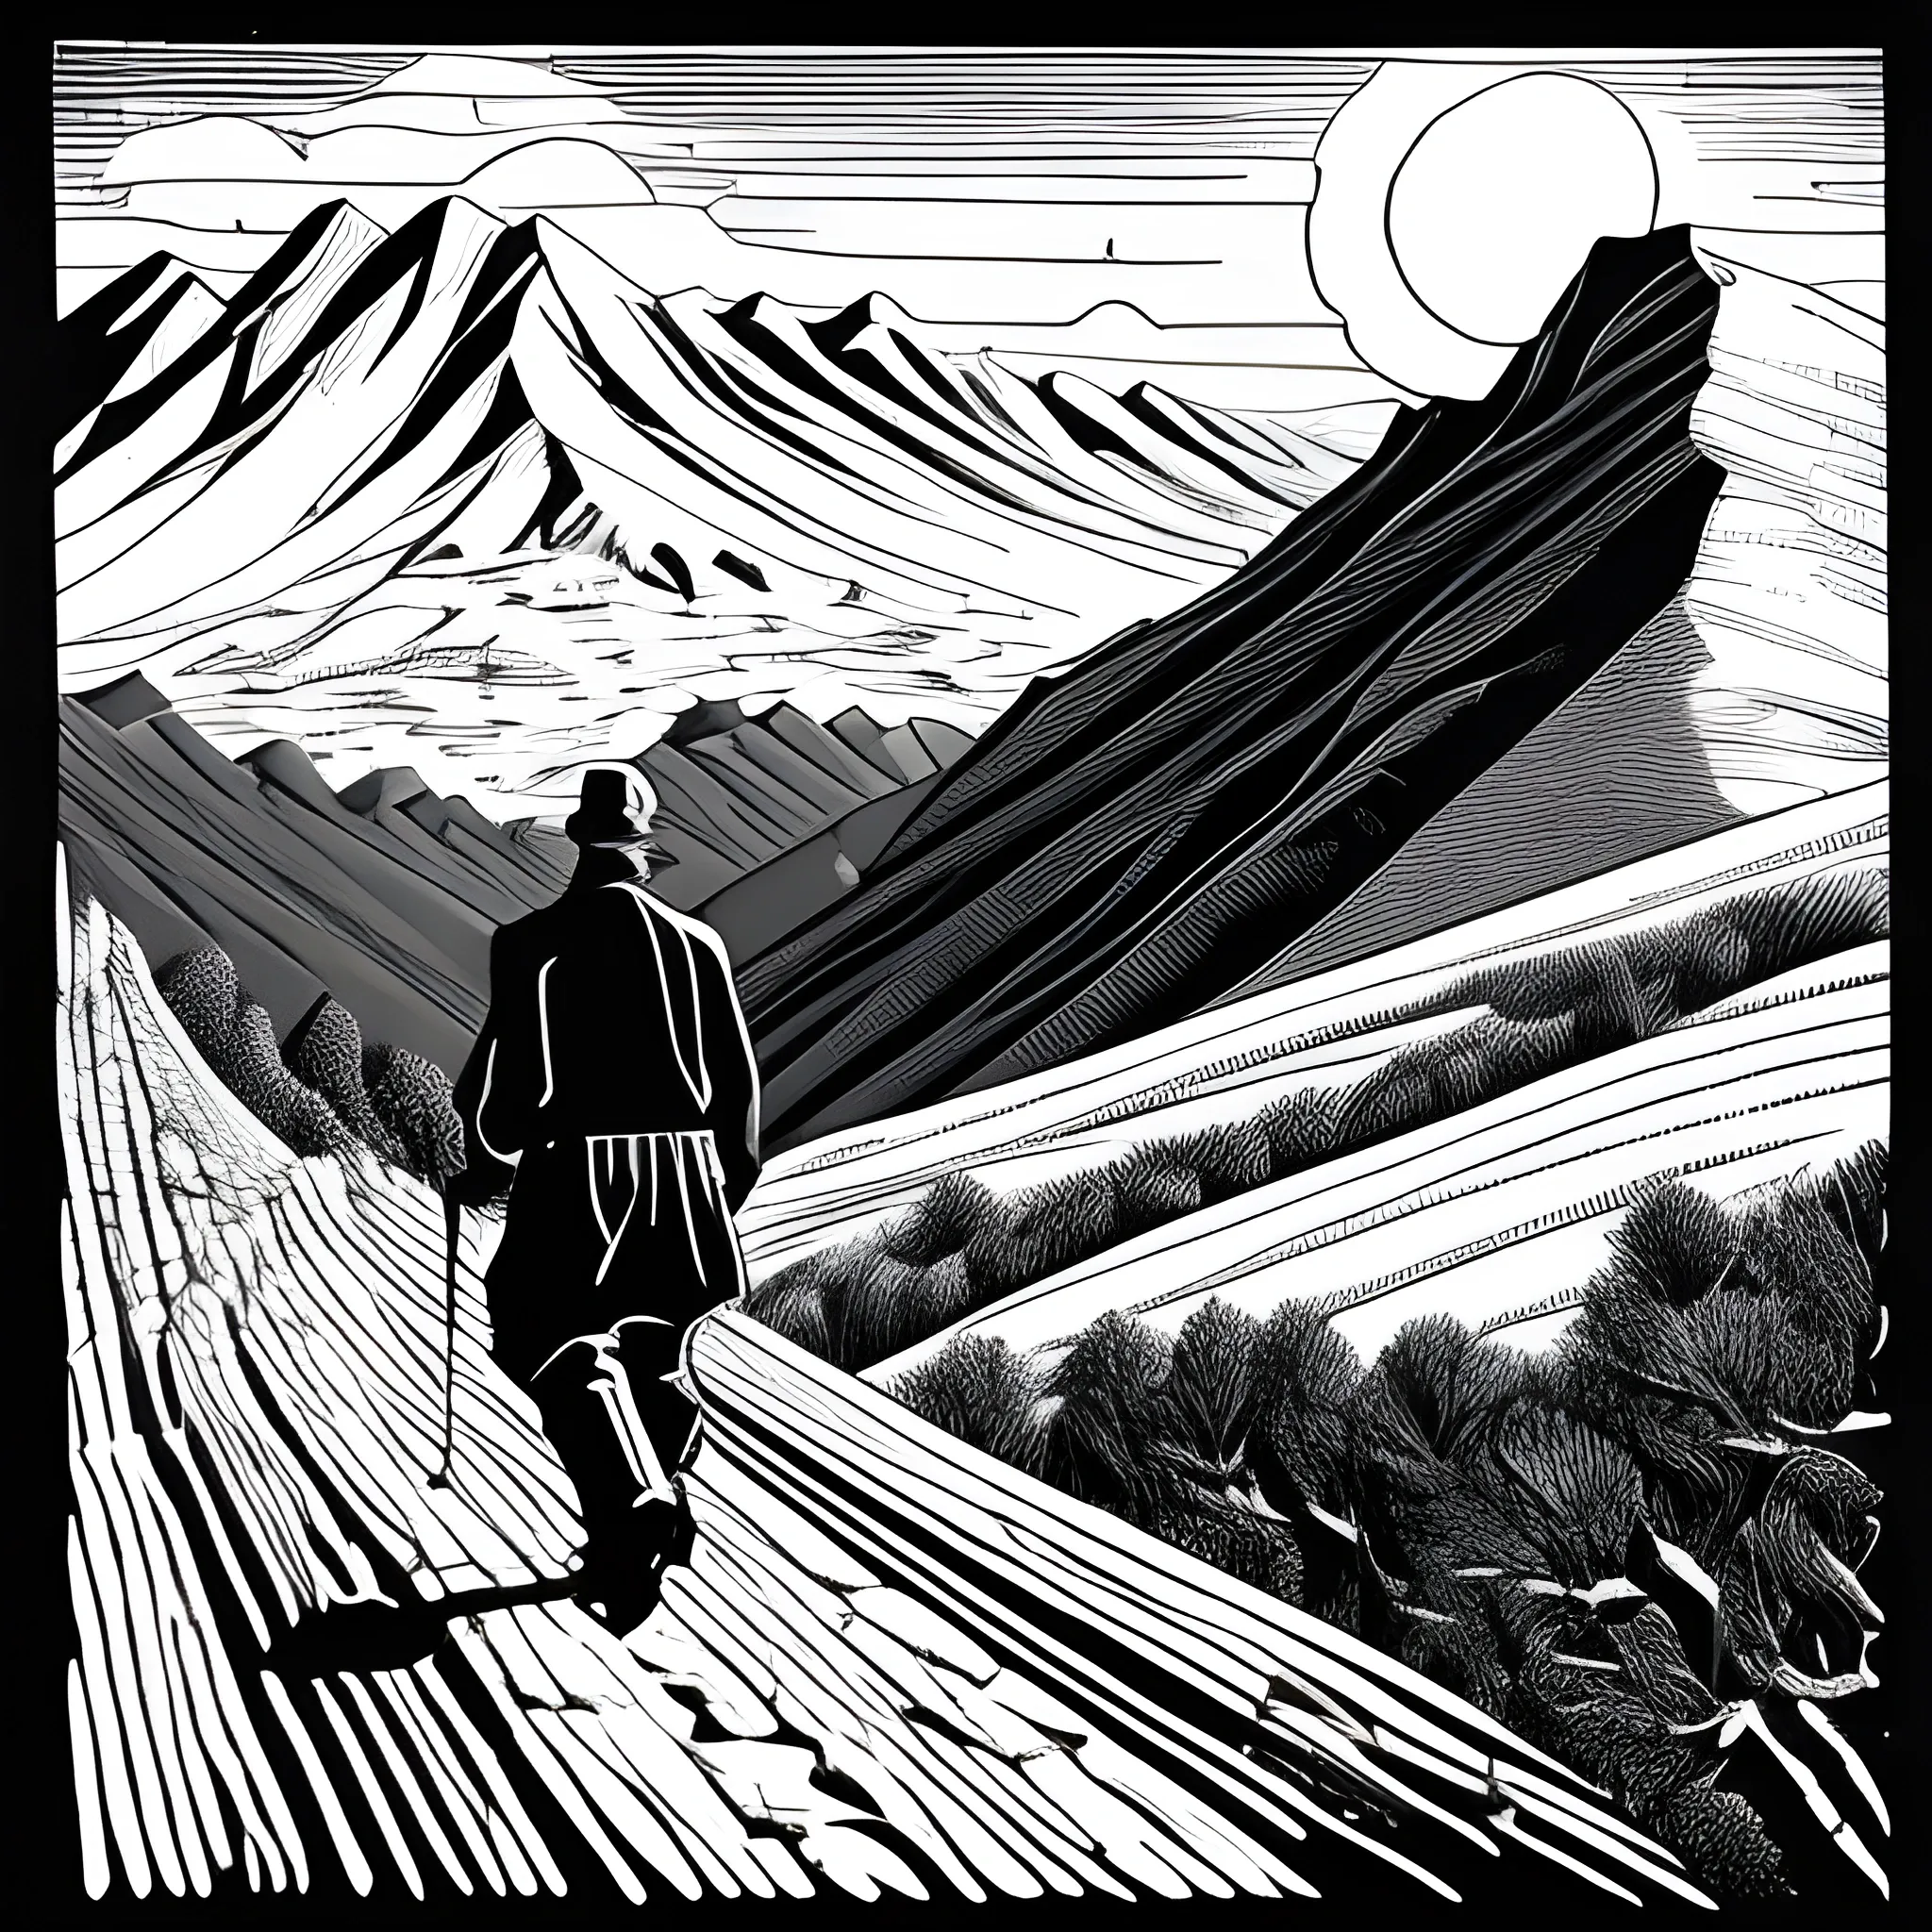 The old man in the mountains walks alone on the mountain trails. Classical black and white woodcut style; strong contrast between light and dark, flat carving technique is used to create the old man's simple expression, and shadows are formed where the lines intersect.